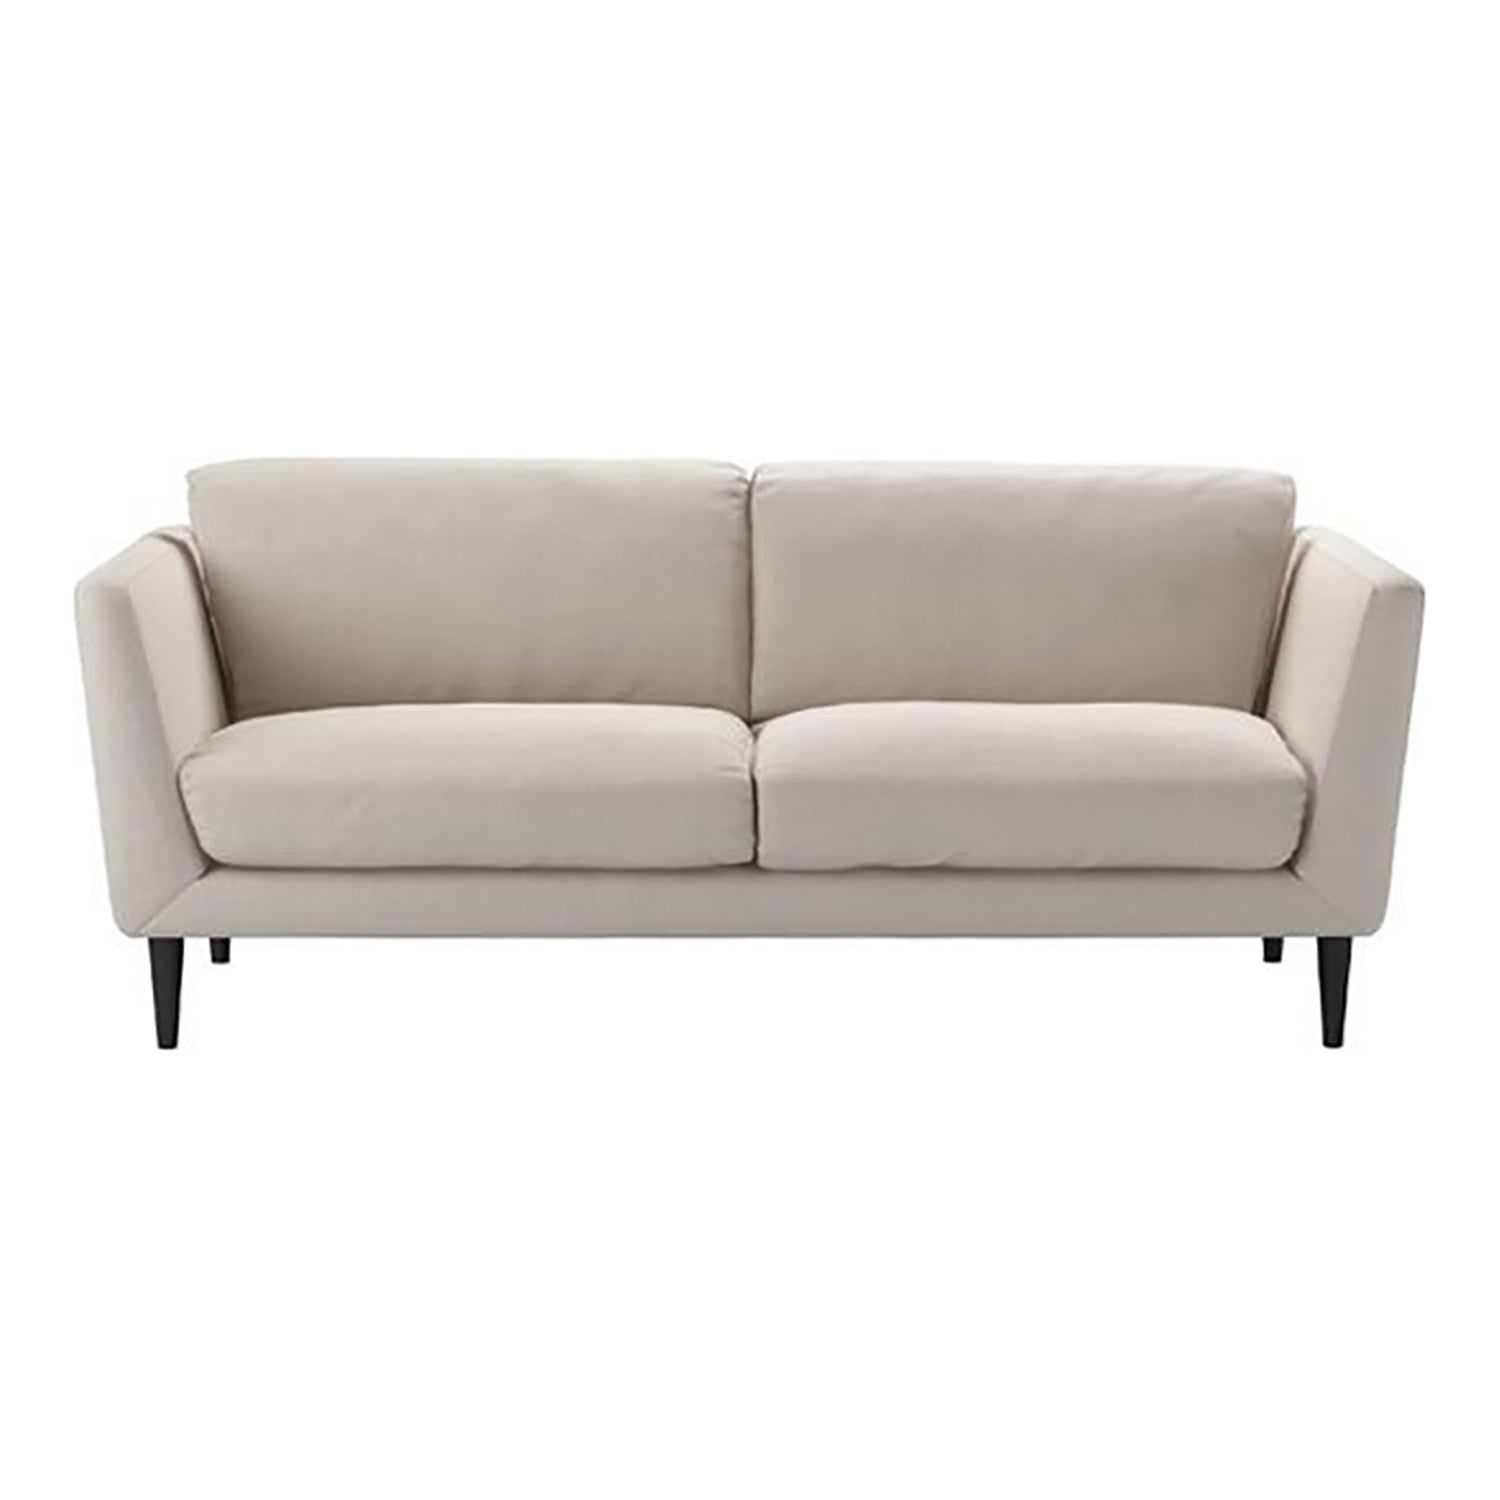 Holly Brushed Linen Cotton Sofa - 2.5 Seater